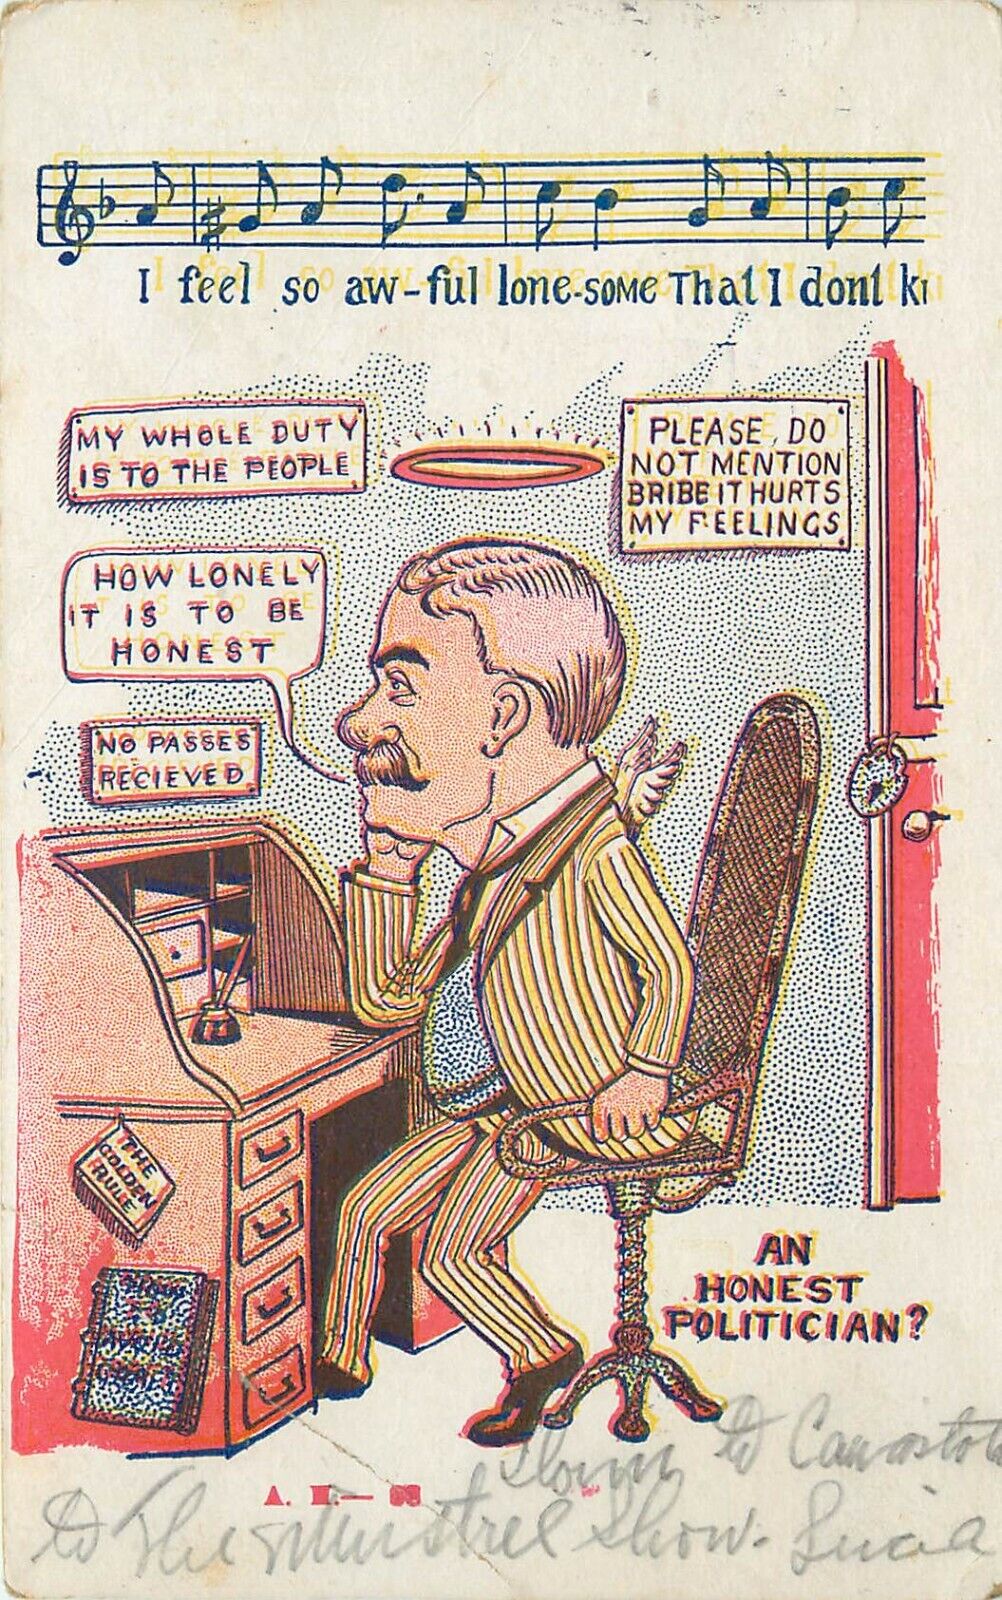 c1907 Postcard An Honest Politician, Halo Man Lonesome at Desk Musical Notation